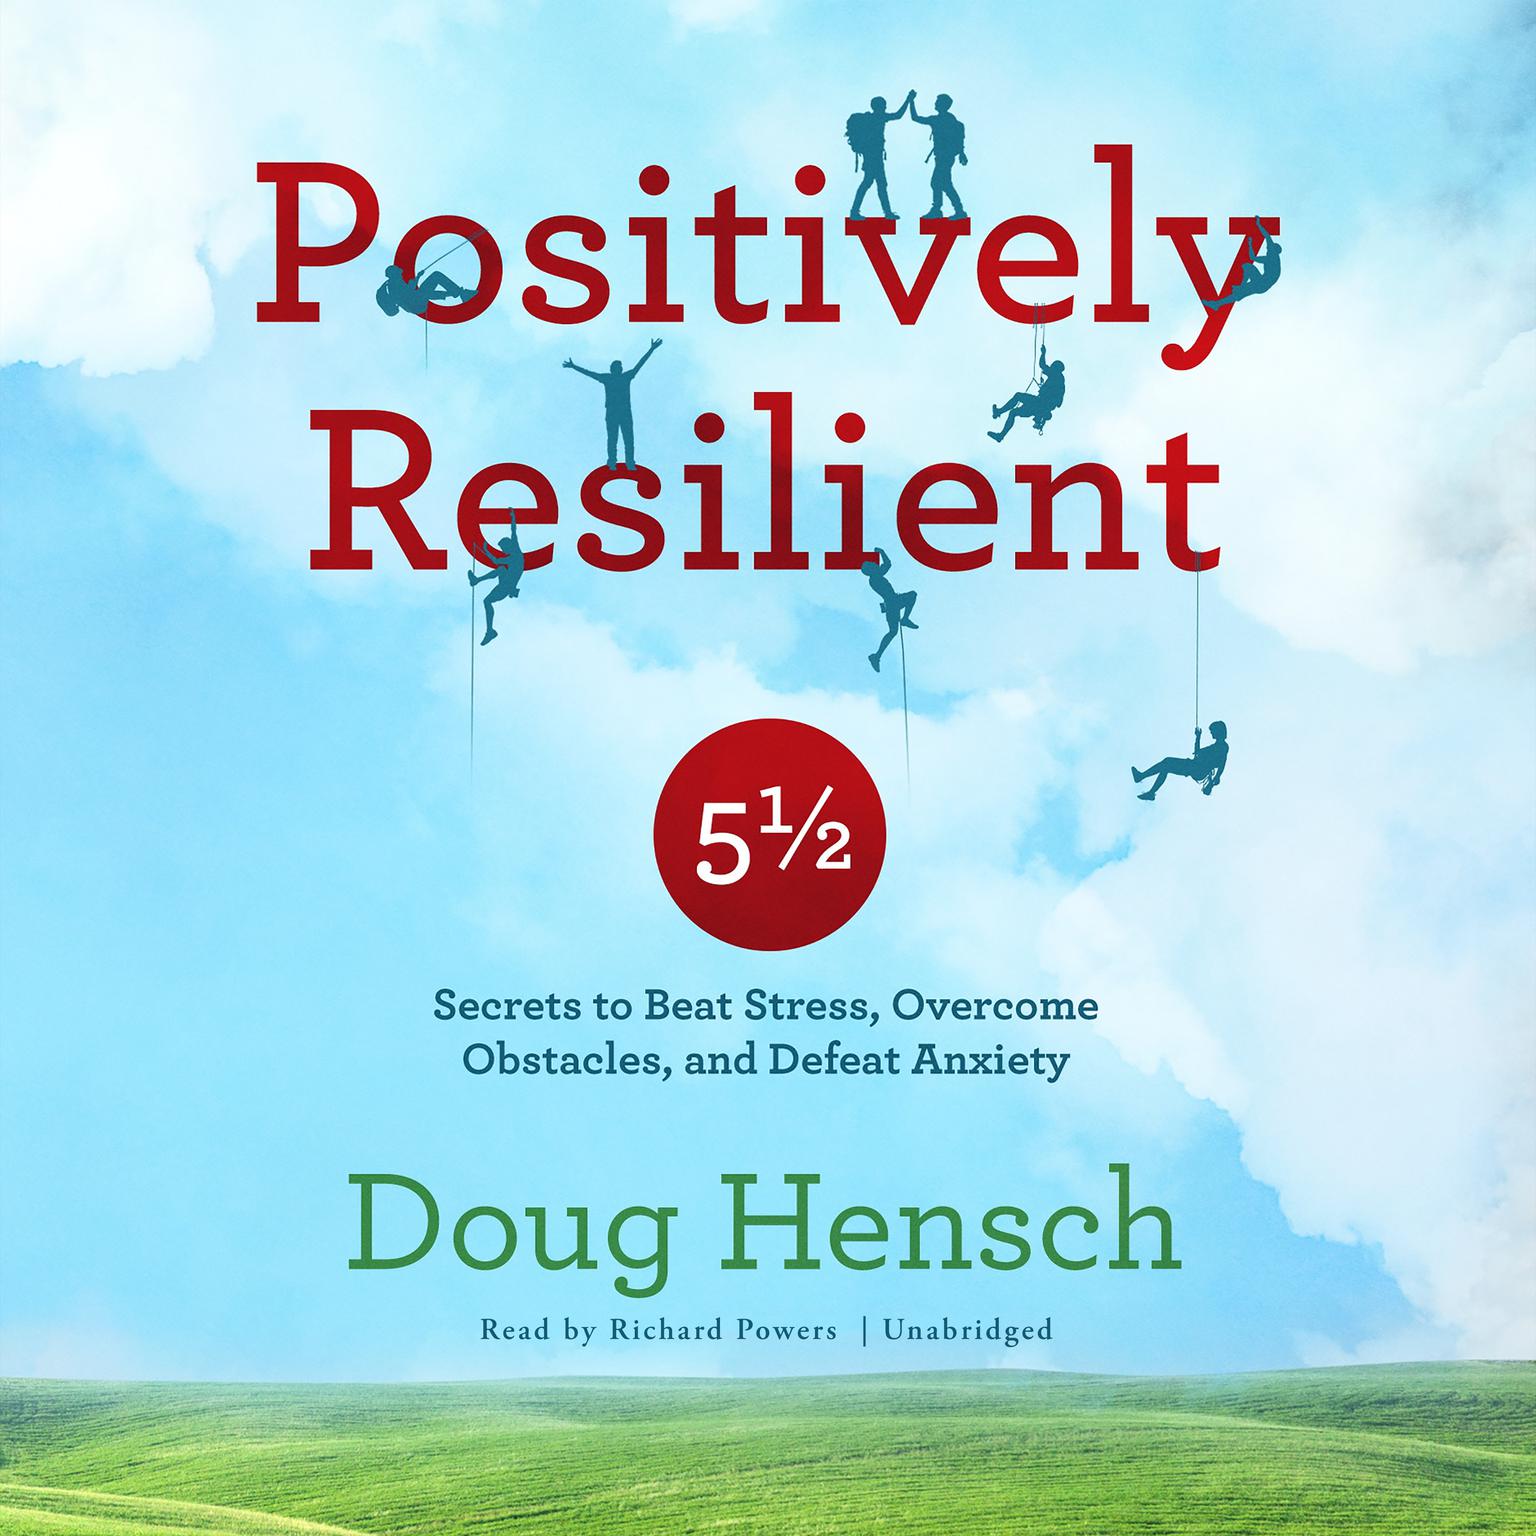 Positively Resilient: 5½ Secrets to Beat Stress, Overcome Obstacles, and Defeat Anxiety Audiobook, by Doug Hensch